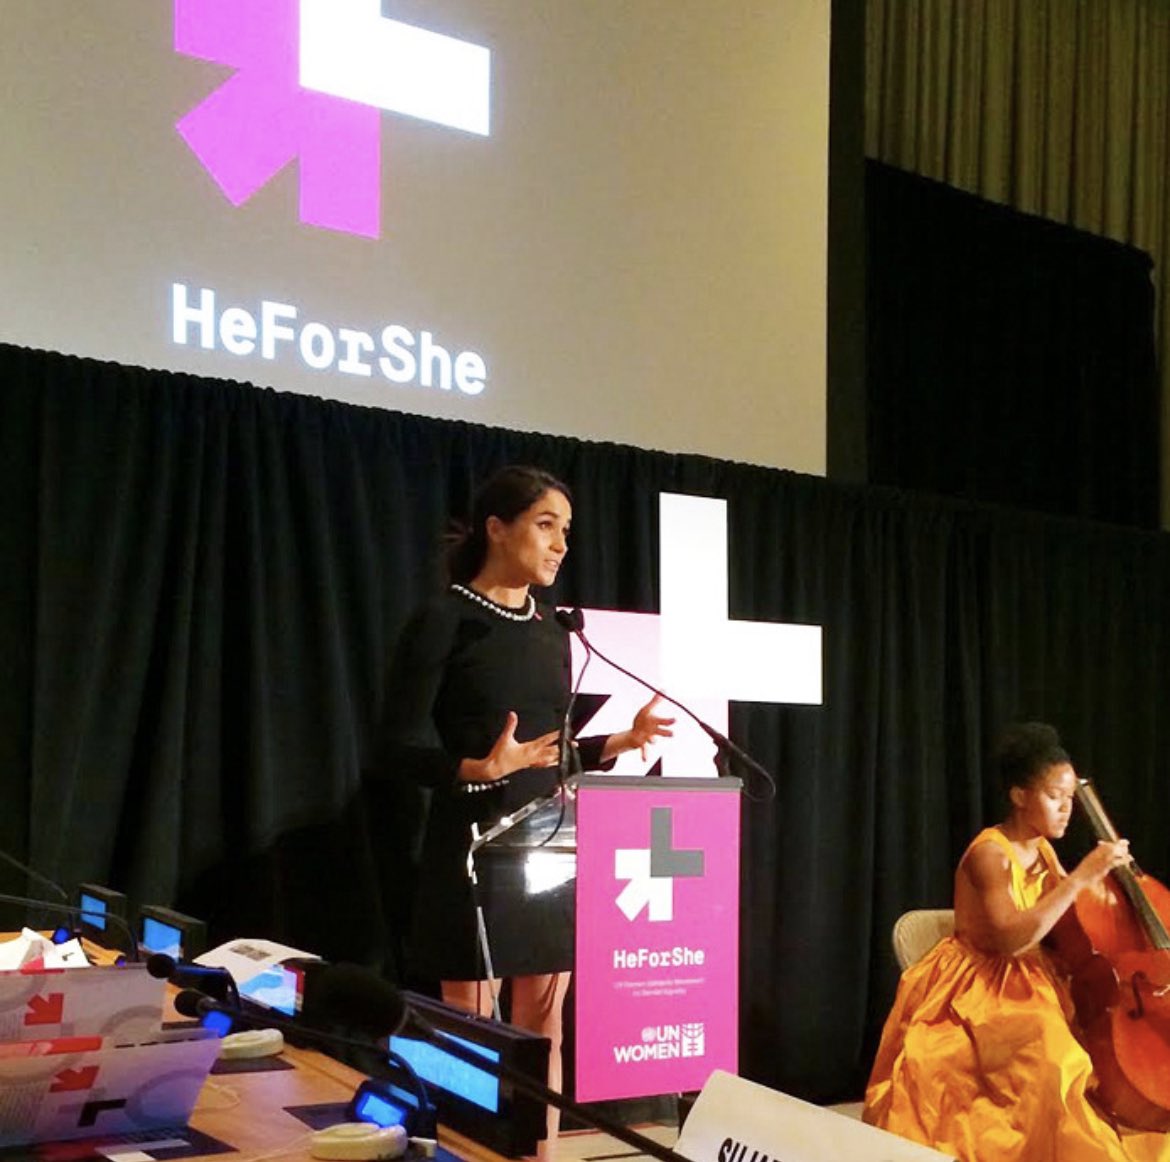 I challenge all of you to join the HeForShe movement - to stand up for the girls and women who need their voices to be heard…I hope that you will sign your names to help spearhead this pivotal moment in gender equality. If not you, who? If not now, when? 
Meghan, 2014 #HeForShe